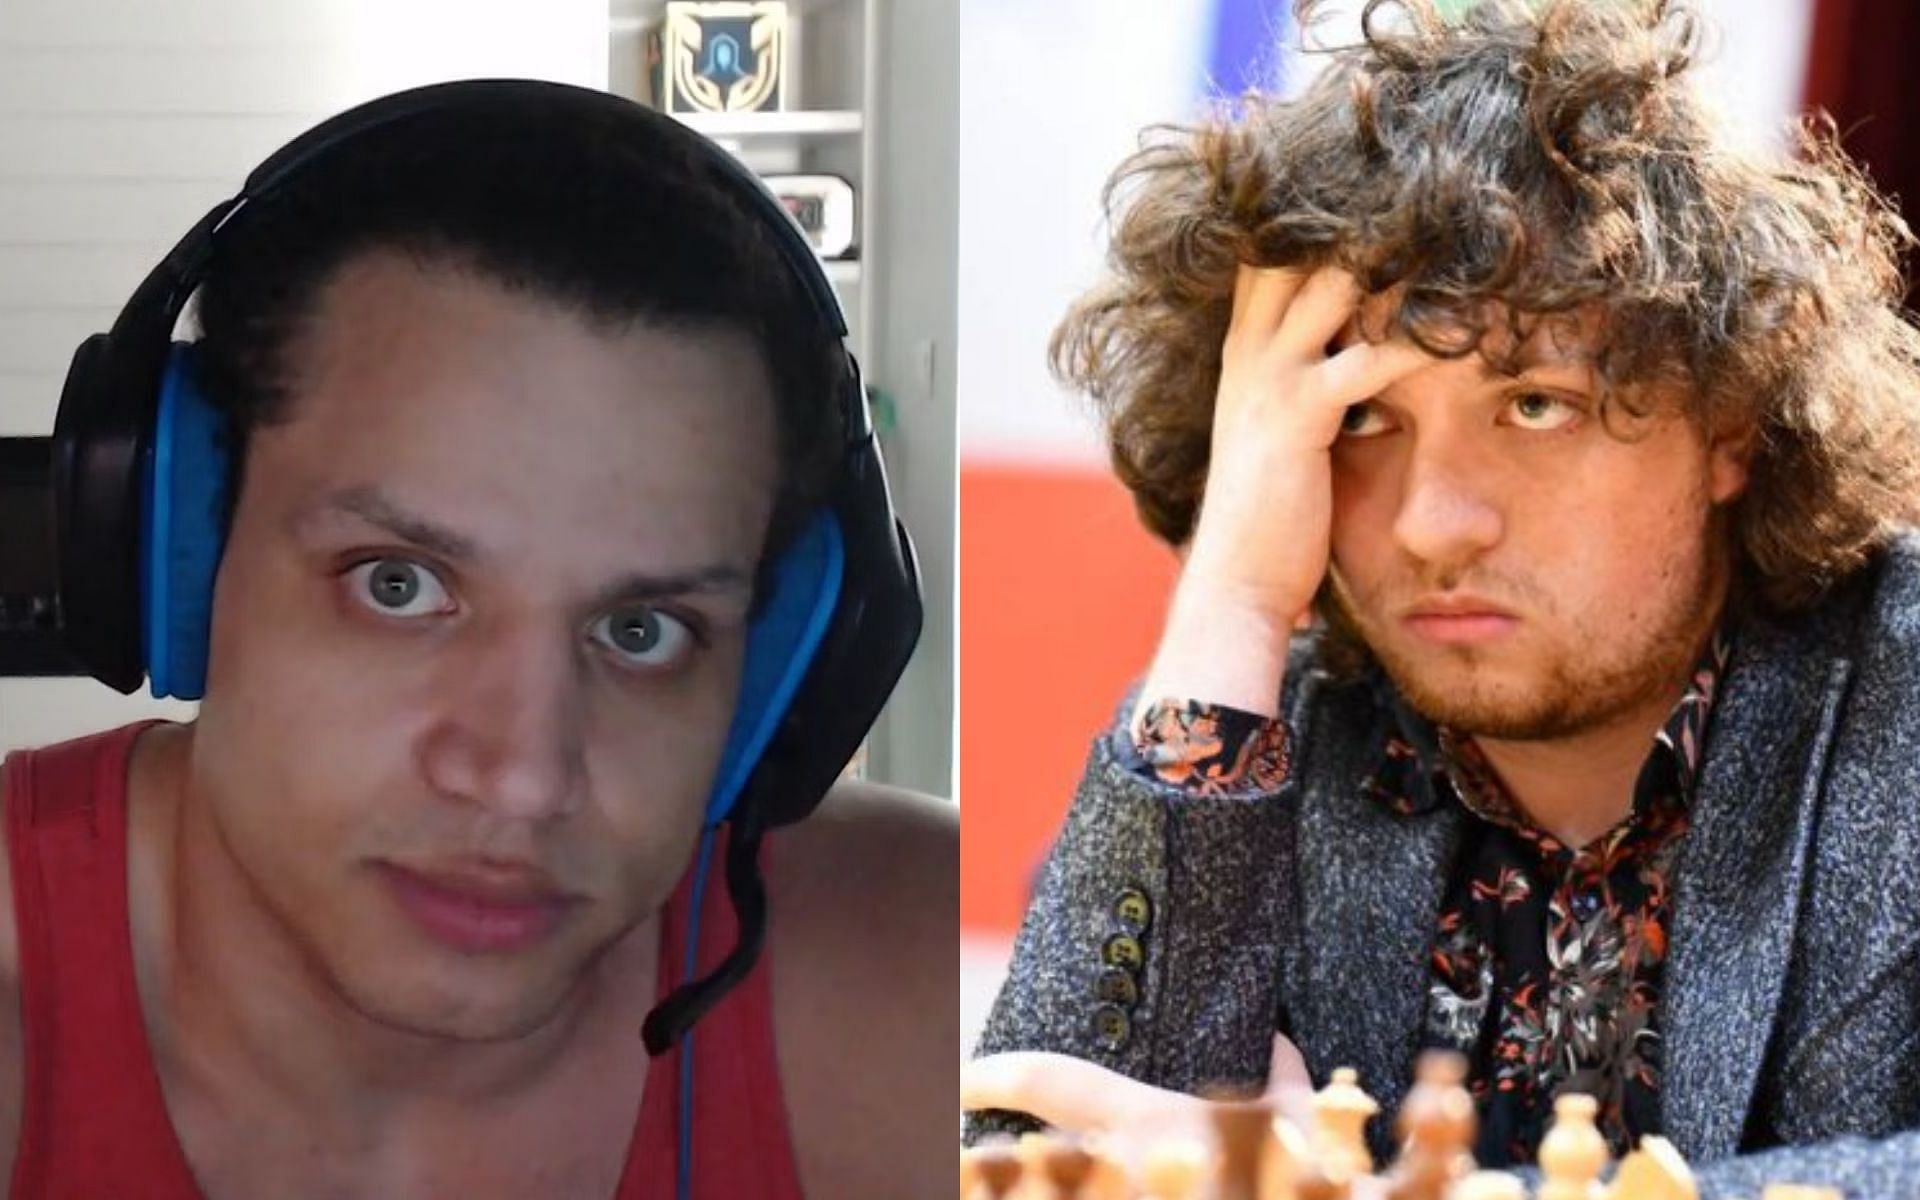 Live Game 🔴  Tyler1 Chess +1199 Rapid Rating - spectatetyler1 on Twitch